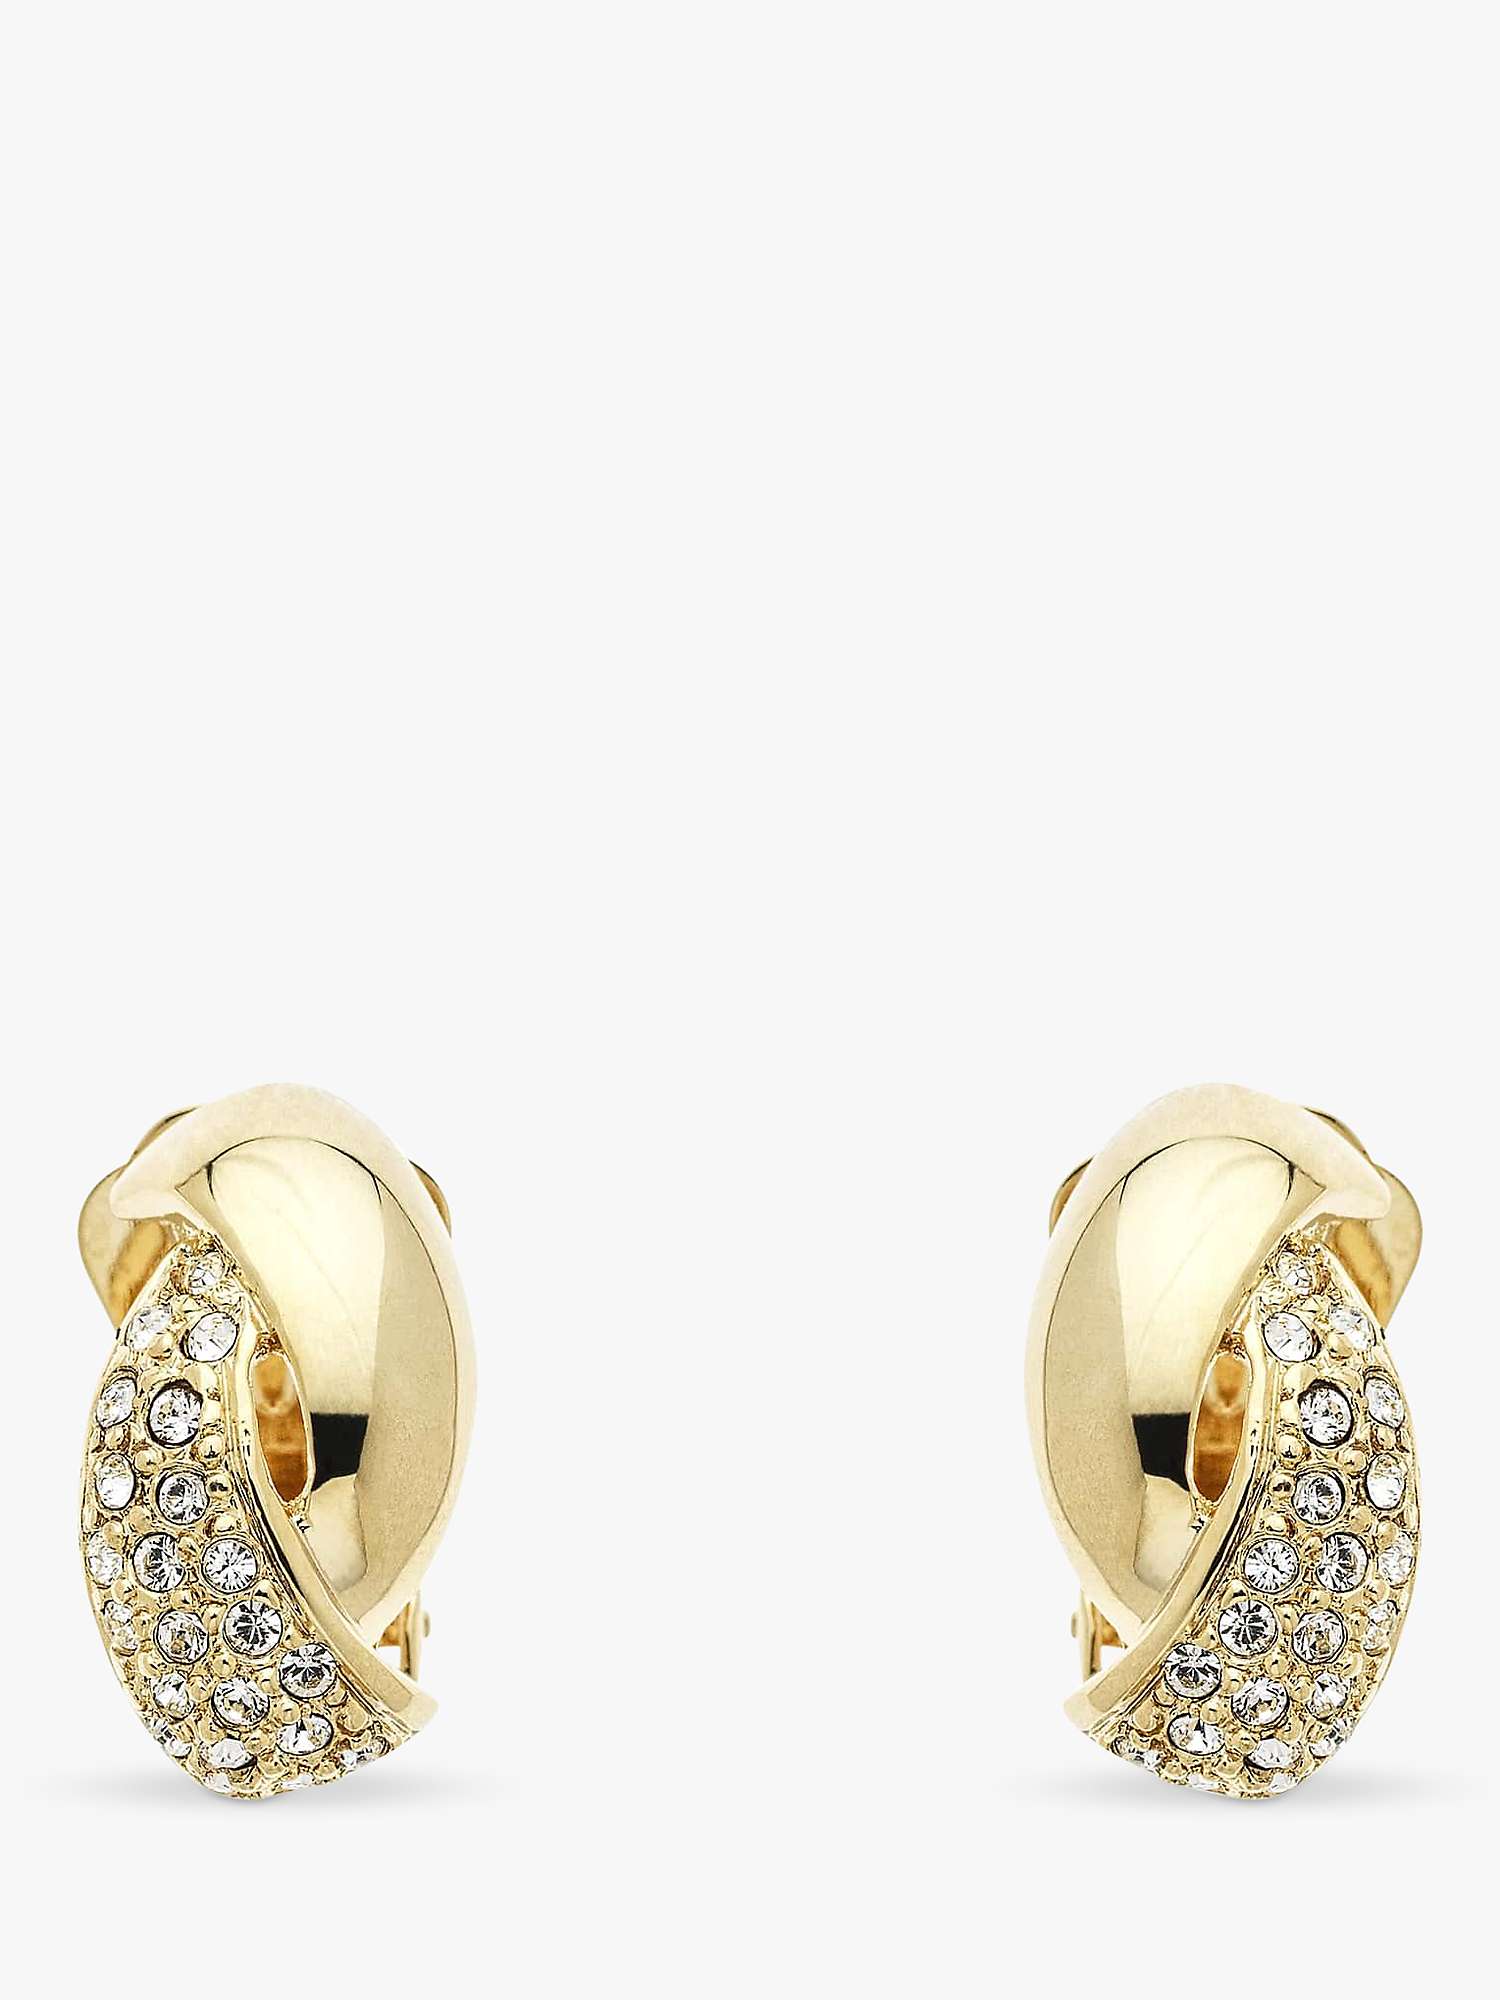 Buy Emma Holland Crystal Twist Clip-On Earrings, Gold Online at johnlewis.com